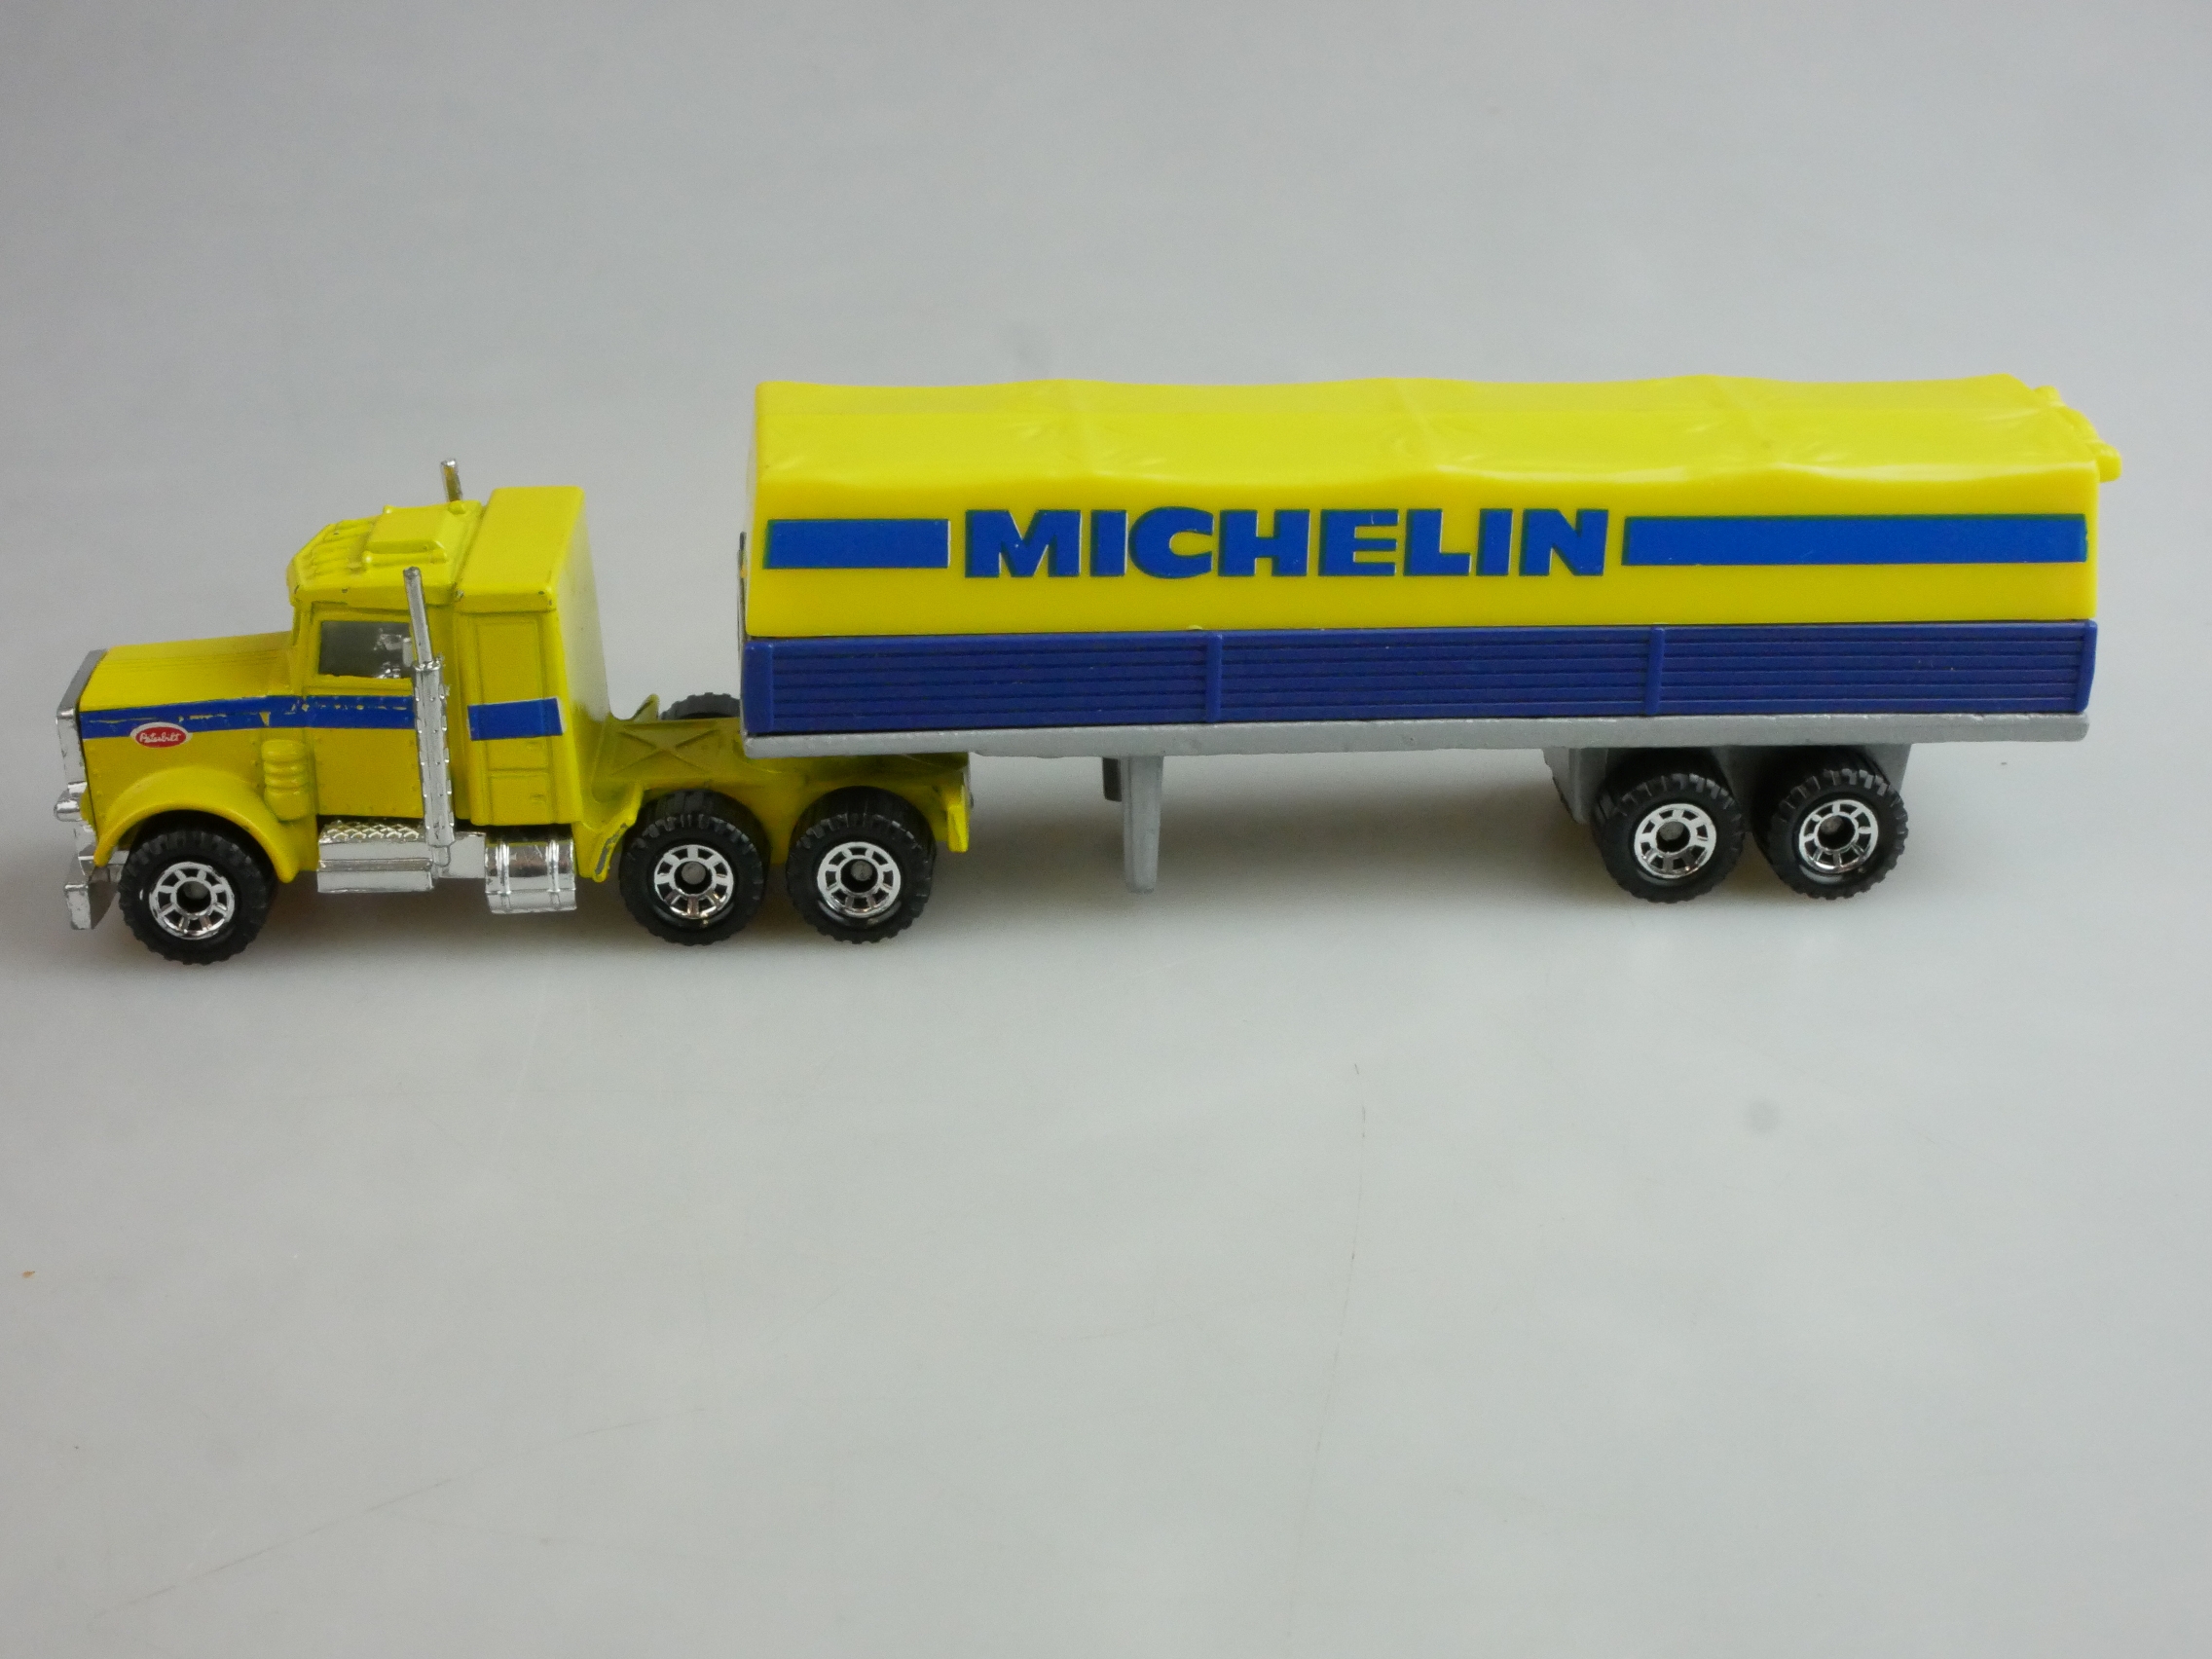 CY-005A Peterbilt Covered Truck MICHELIN - 27807